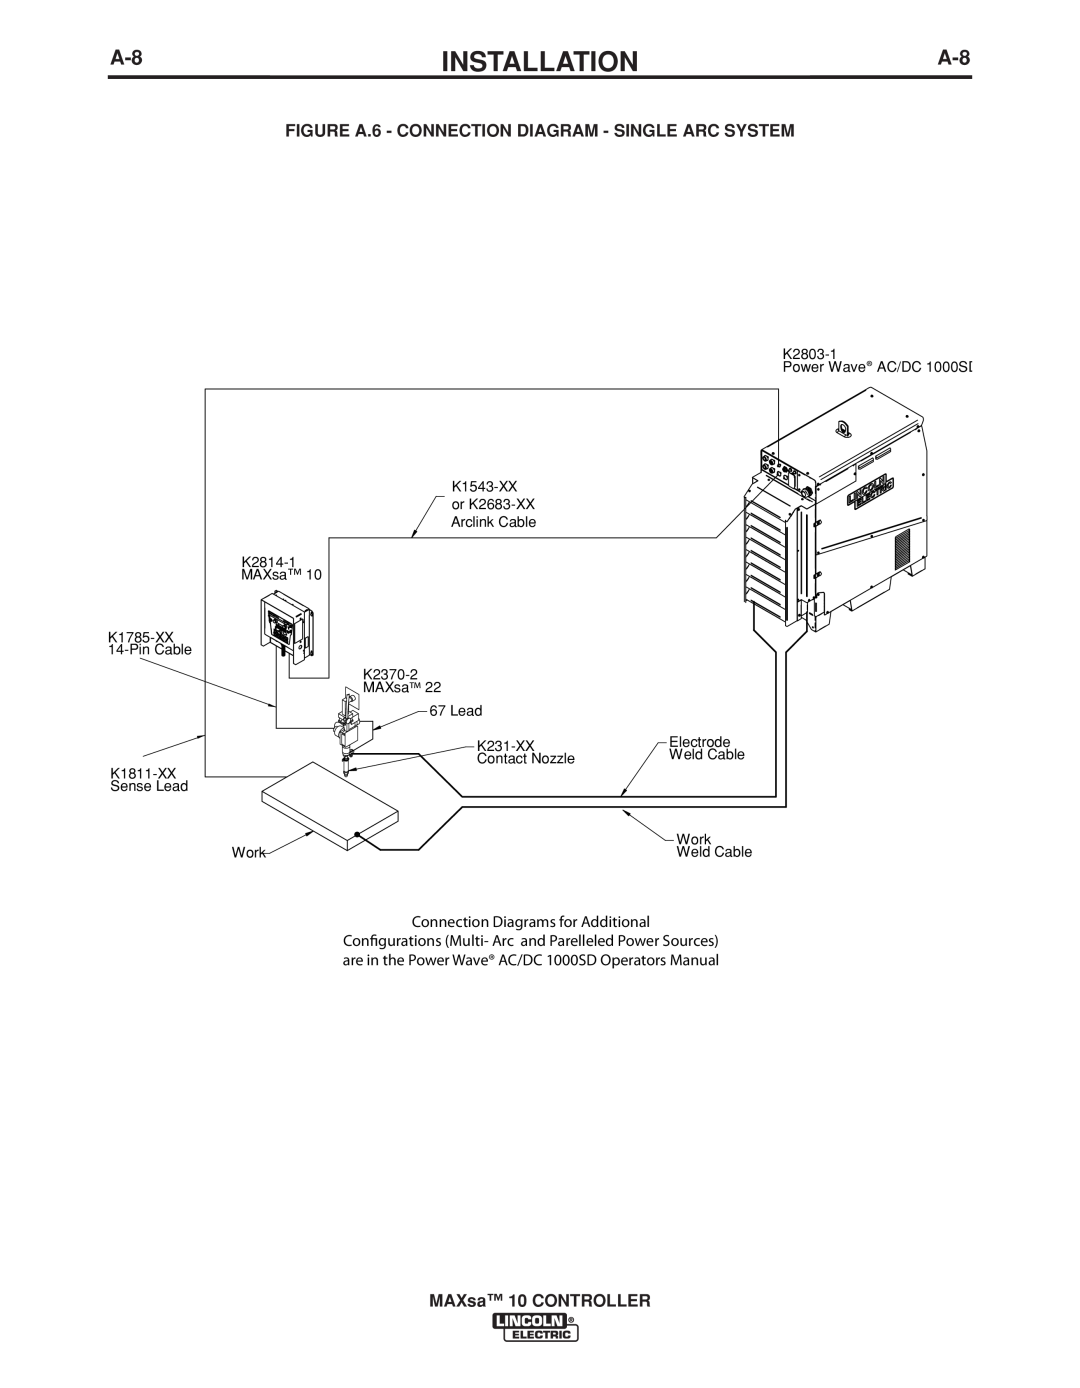 Lincoln Electric IM10023 manual Installation, Connection Diagrams for Additional 